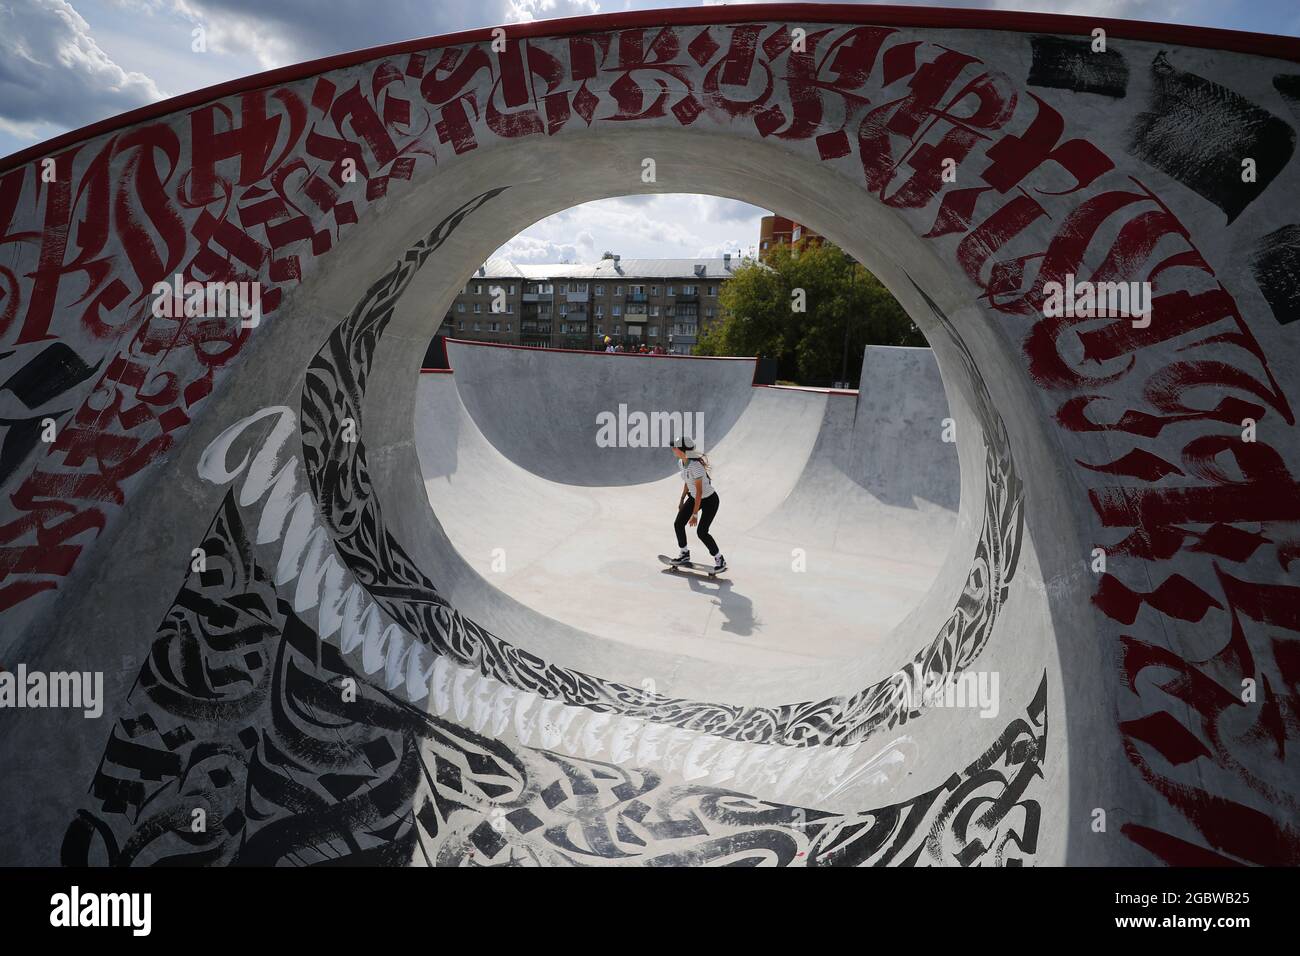 Ivanovo, Russia. 5th Aug, 2021. A woman practises skateboarding in a new  skate park opened at the Palace of Team Sports to mark Ivanovo's City Day.  The whole recreation area also including